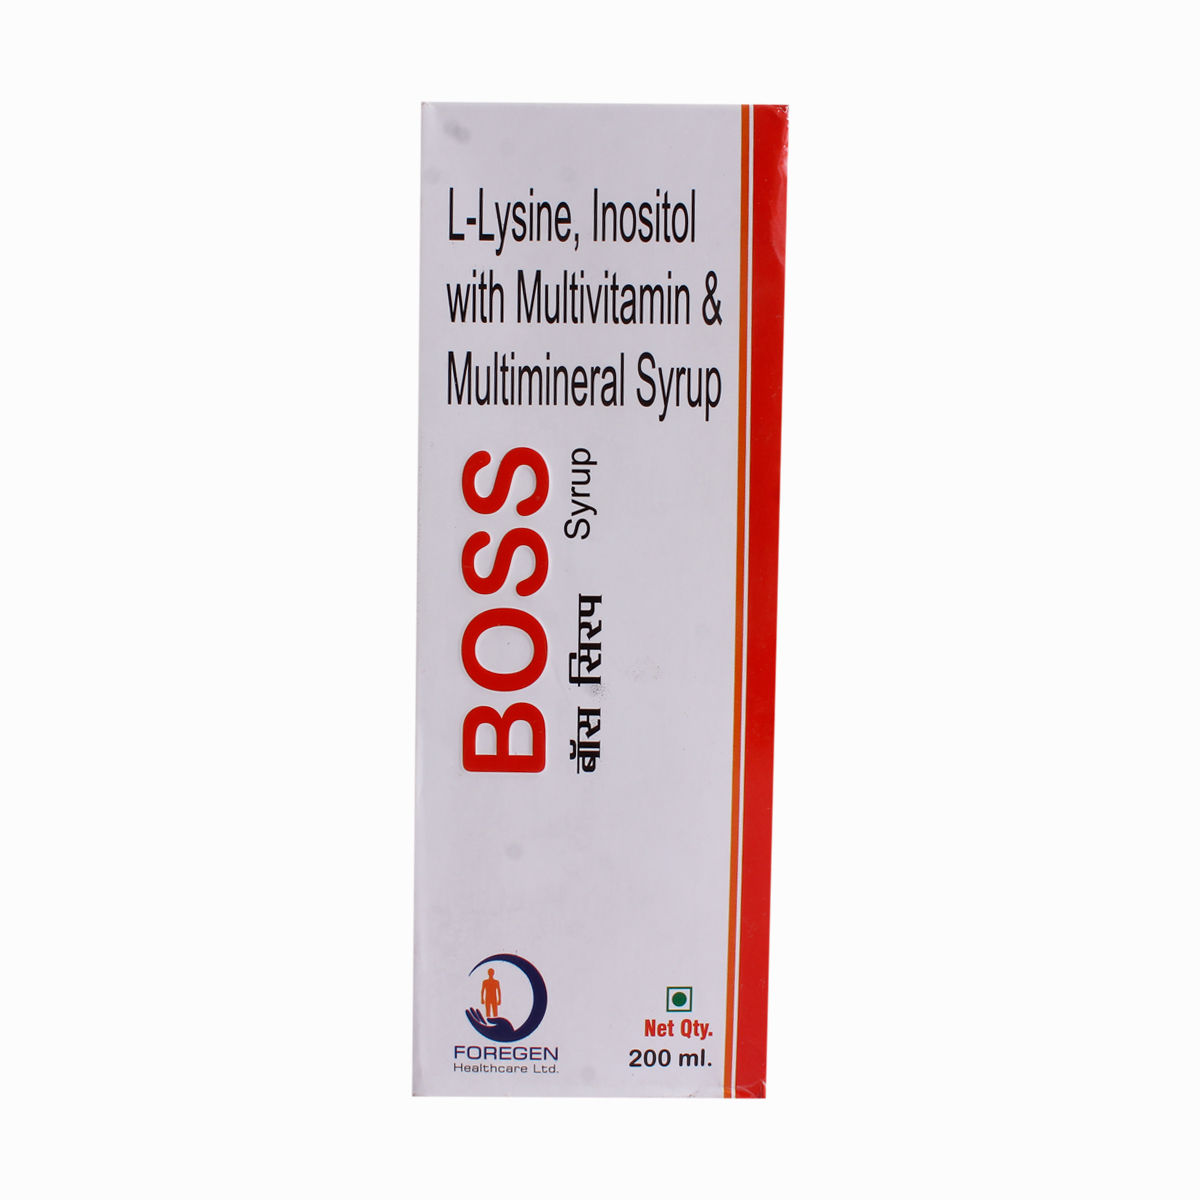 Boss Syrup 200 ml, Pack of 1 